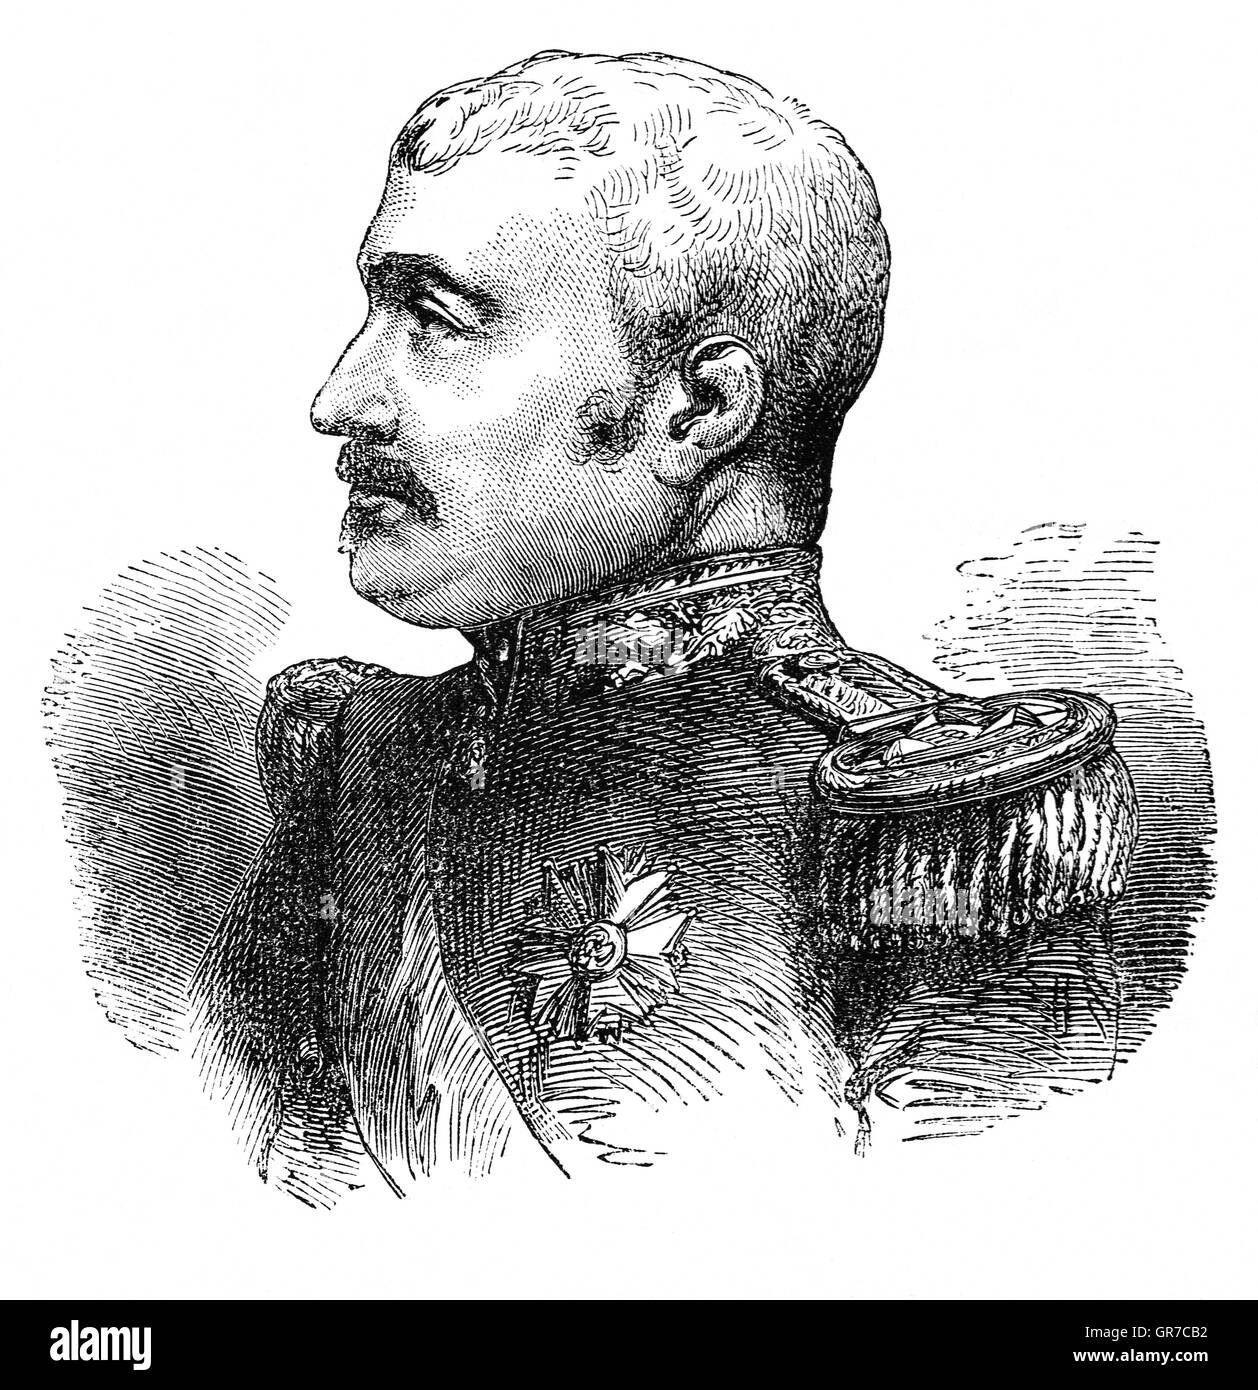 Aimable-Jean-Jacques Pélissier, 1st Duc de Malakoff (1794 –1864), was a Marshal of France.   In 1855 he succeeded Marshal Canrobert as commander-in-chief of the French forces before the Siege of Sevastopol, a command marked by relentless pressure of the enemy and unalterable determination to conduct the campaign without interference from Paris. His perseverance was crowned with success in the storming of the Tower of Malakoff which ended the Siege of Sevastopol, crowning the Anglo-French Crimean War against Russia with victory. Stock Photo